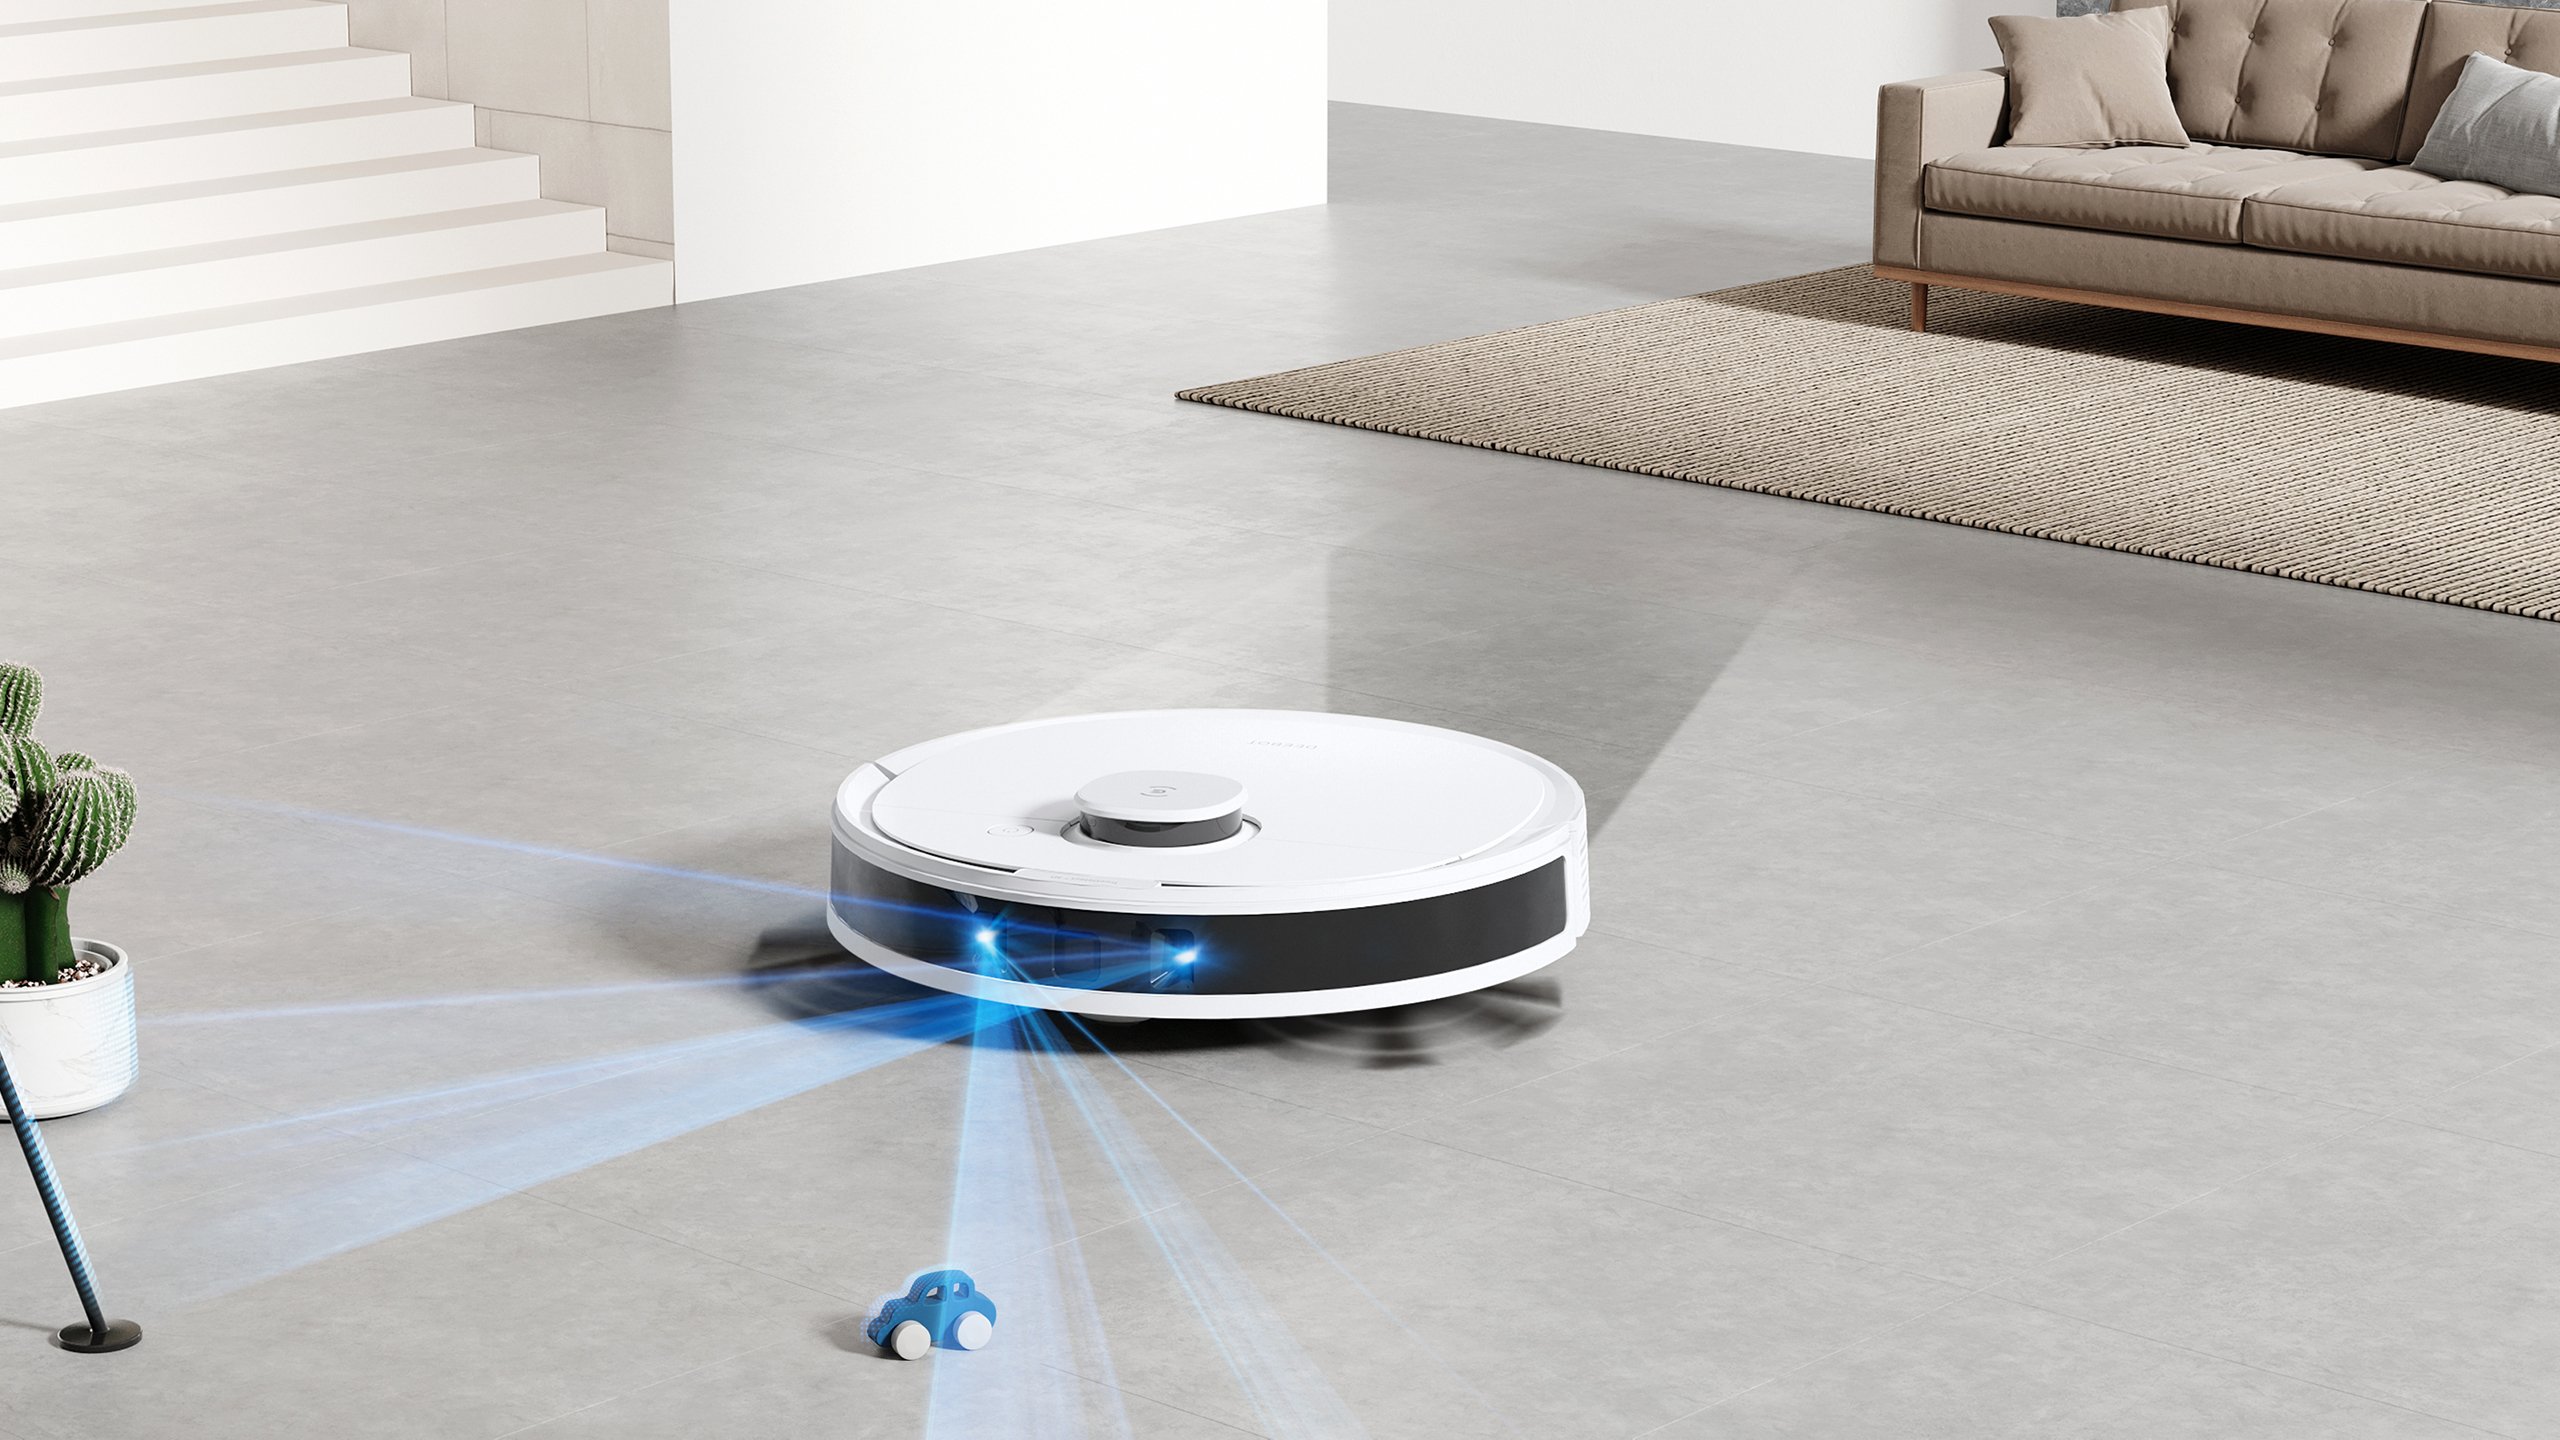 The best robot vacuum and mop hybrids, because if you don’t like vacuuming, you definitely hate mopping